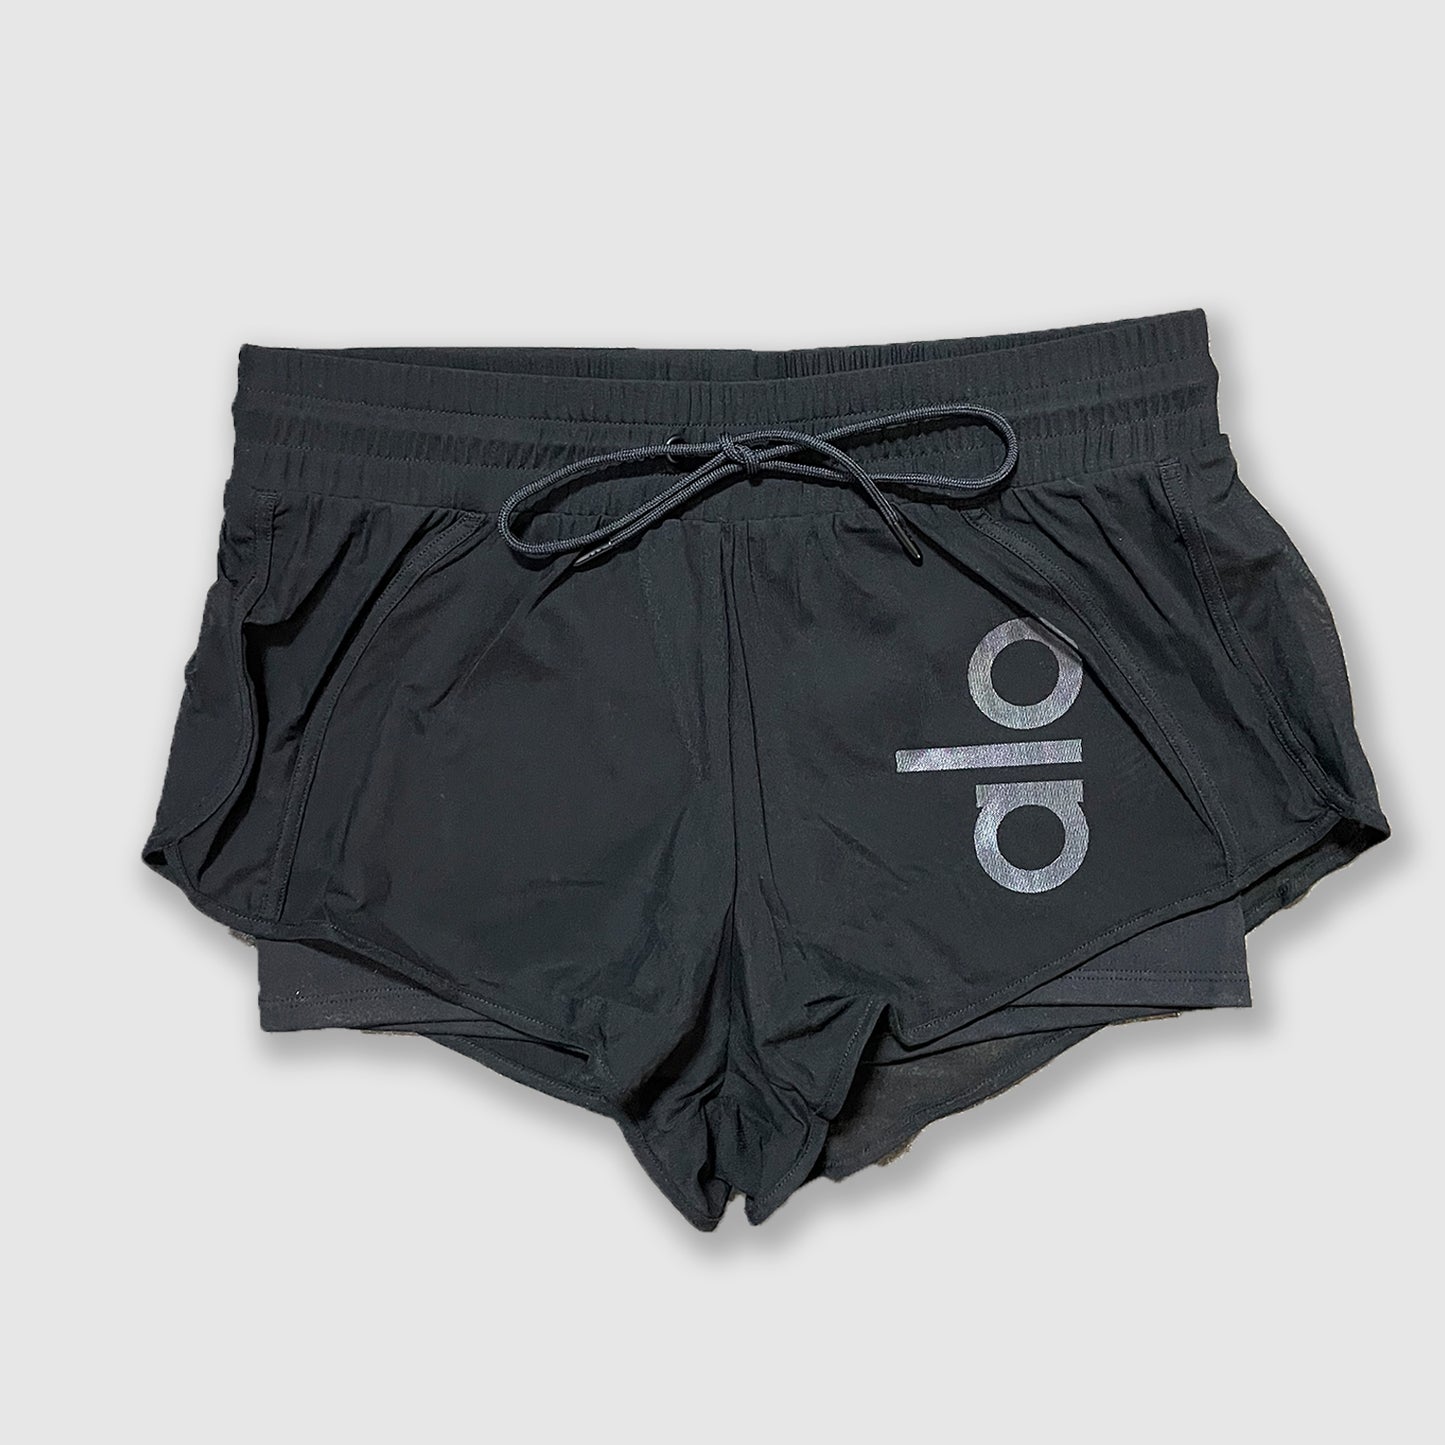 Custom Ambience Short. Powered by ALO